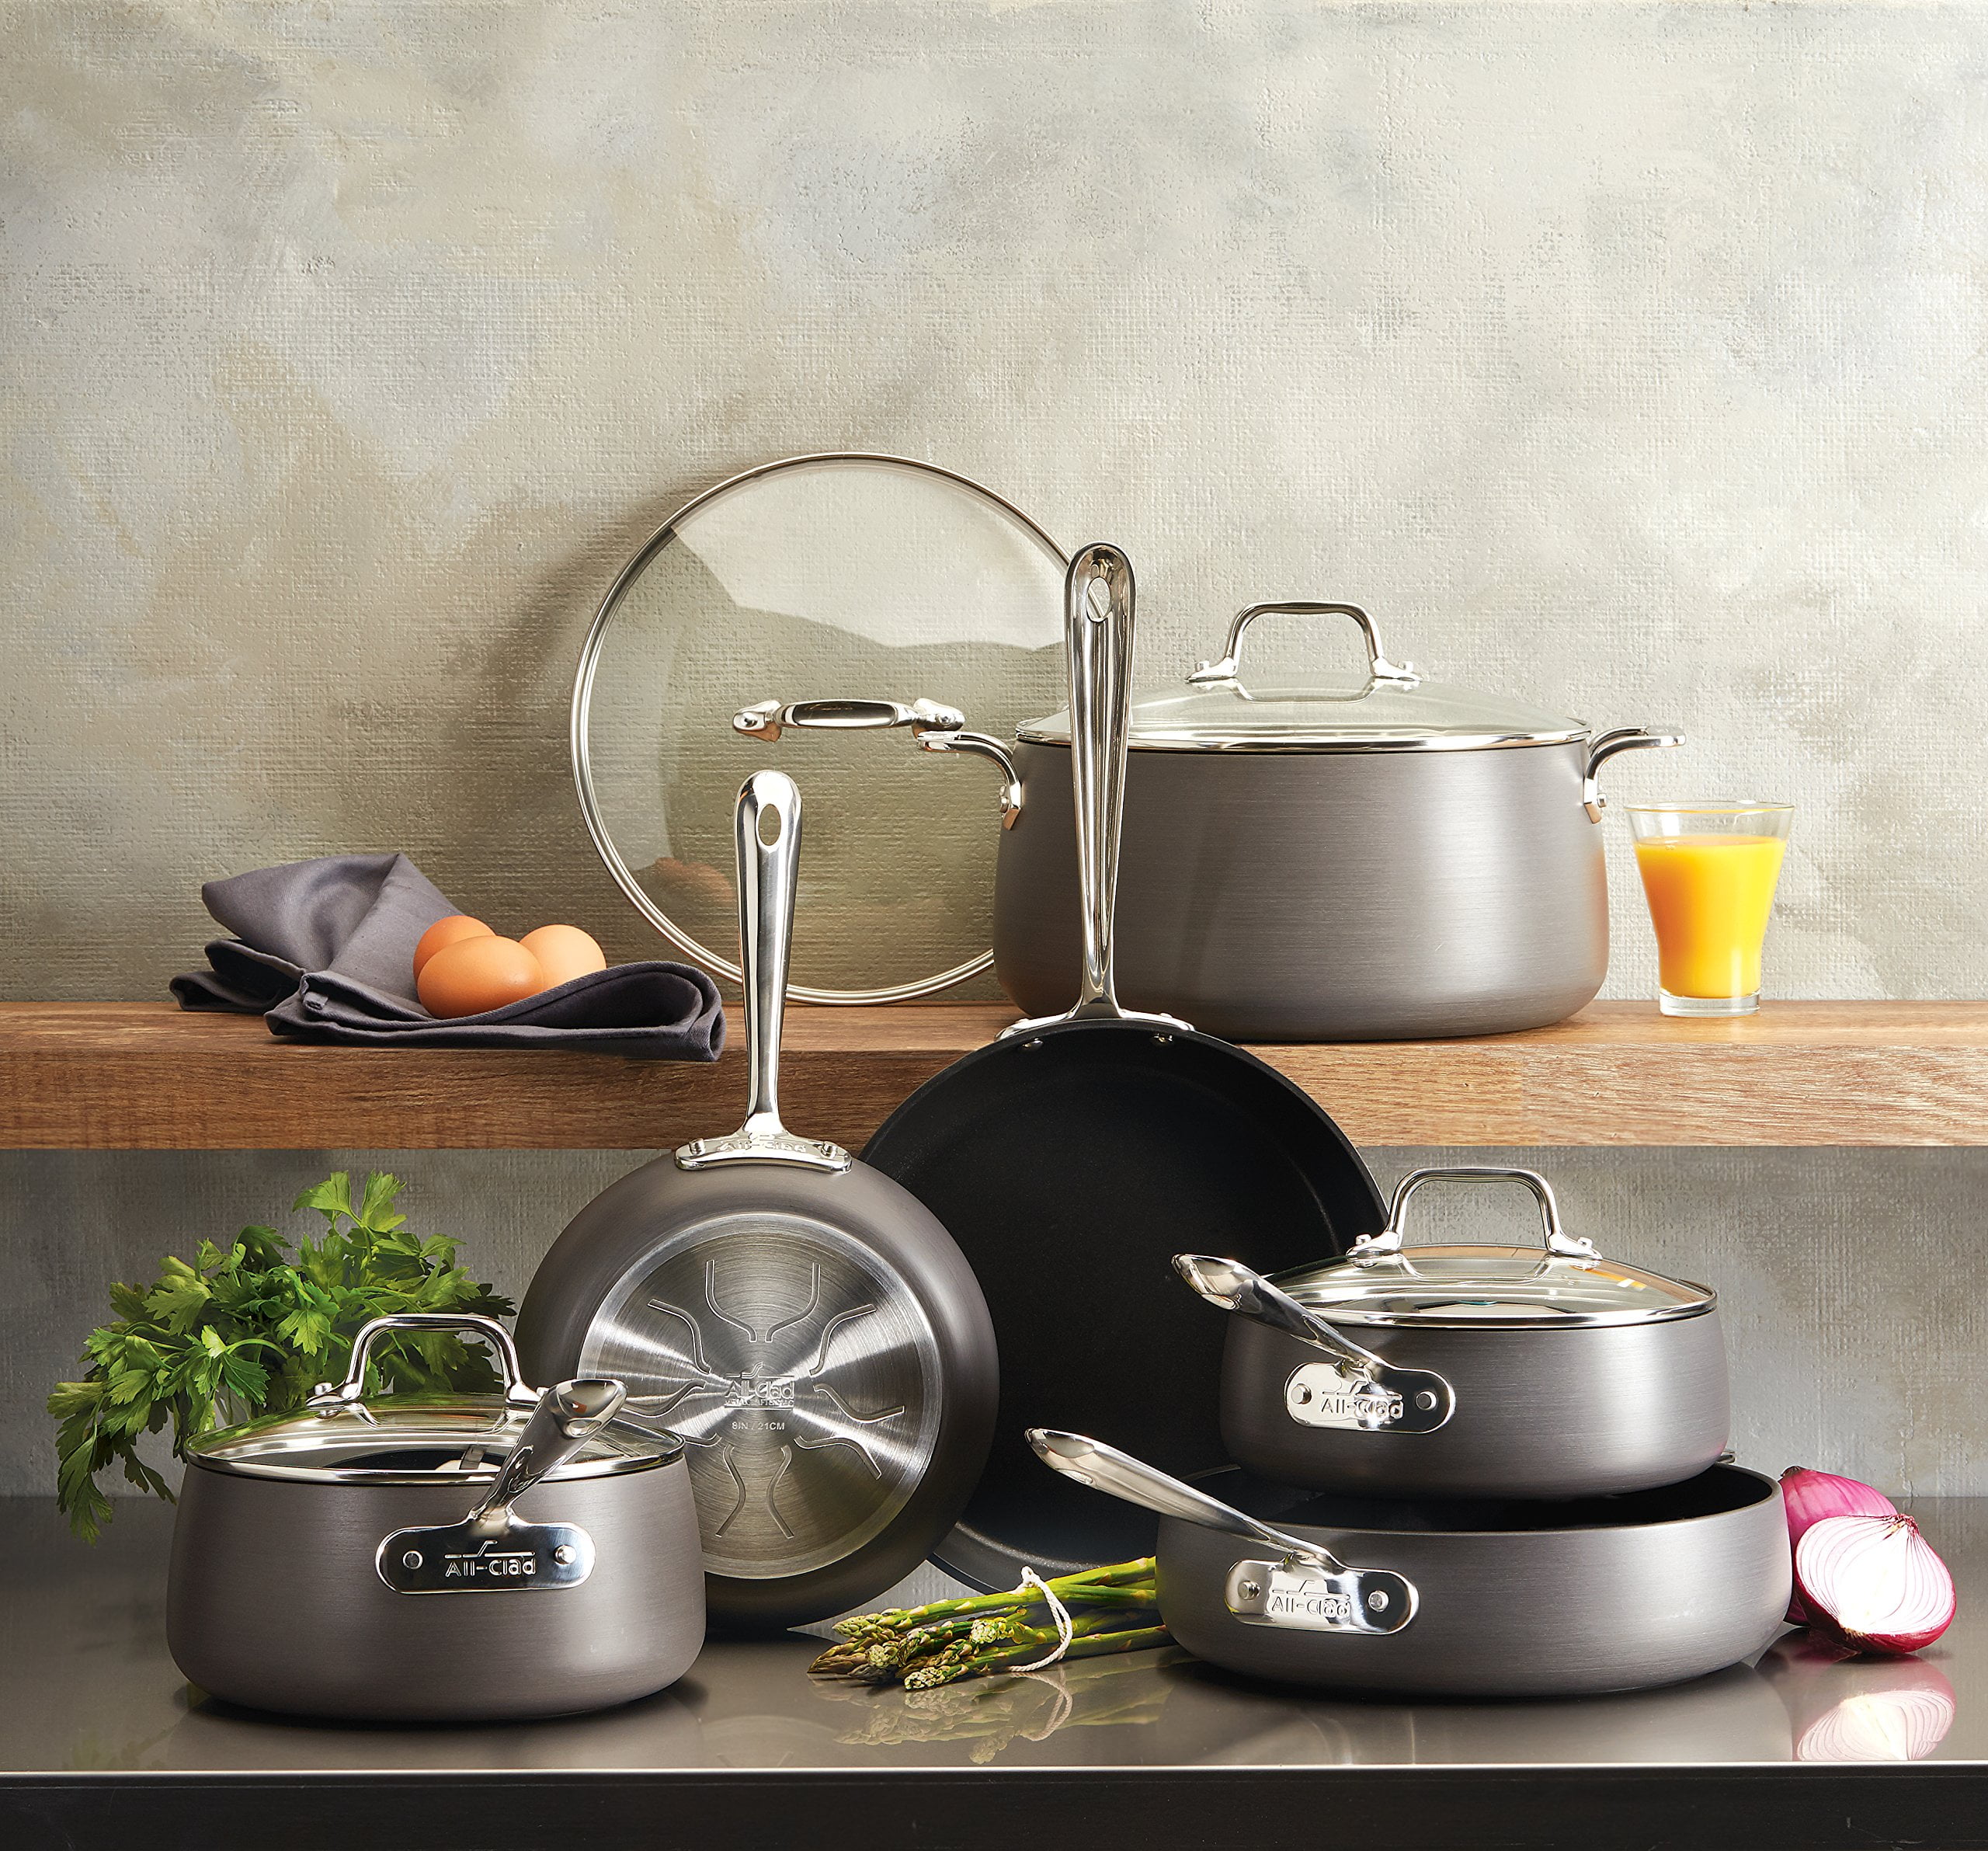 All-Clad B1 Nonstick Hard Anodized Cookware Set - 13 Piece for